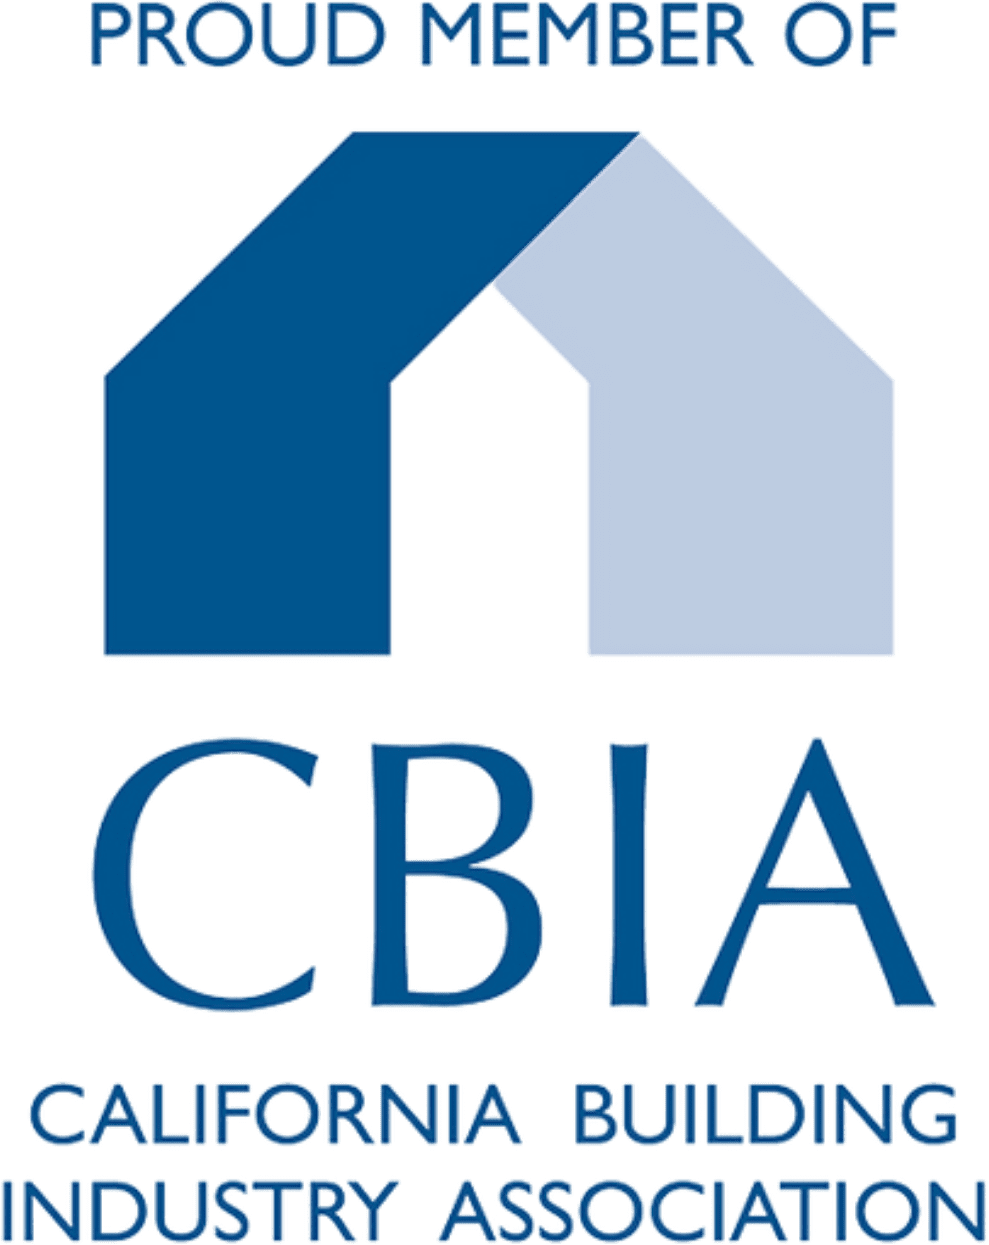 The logo for the california building industry association.